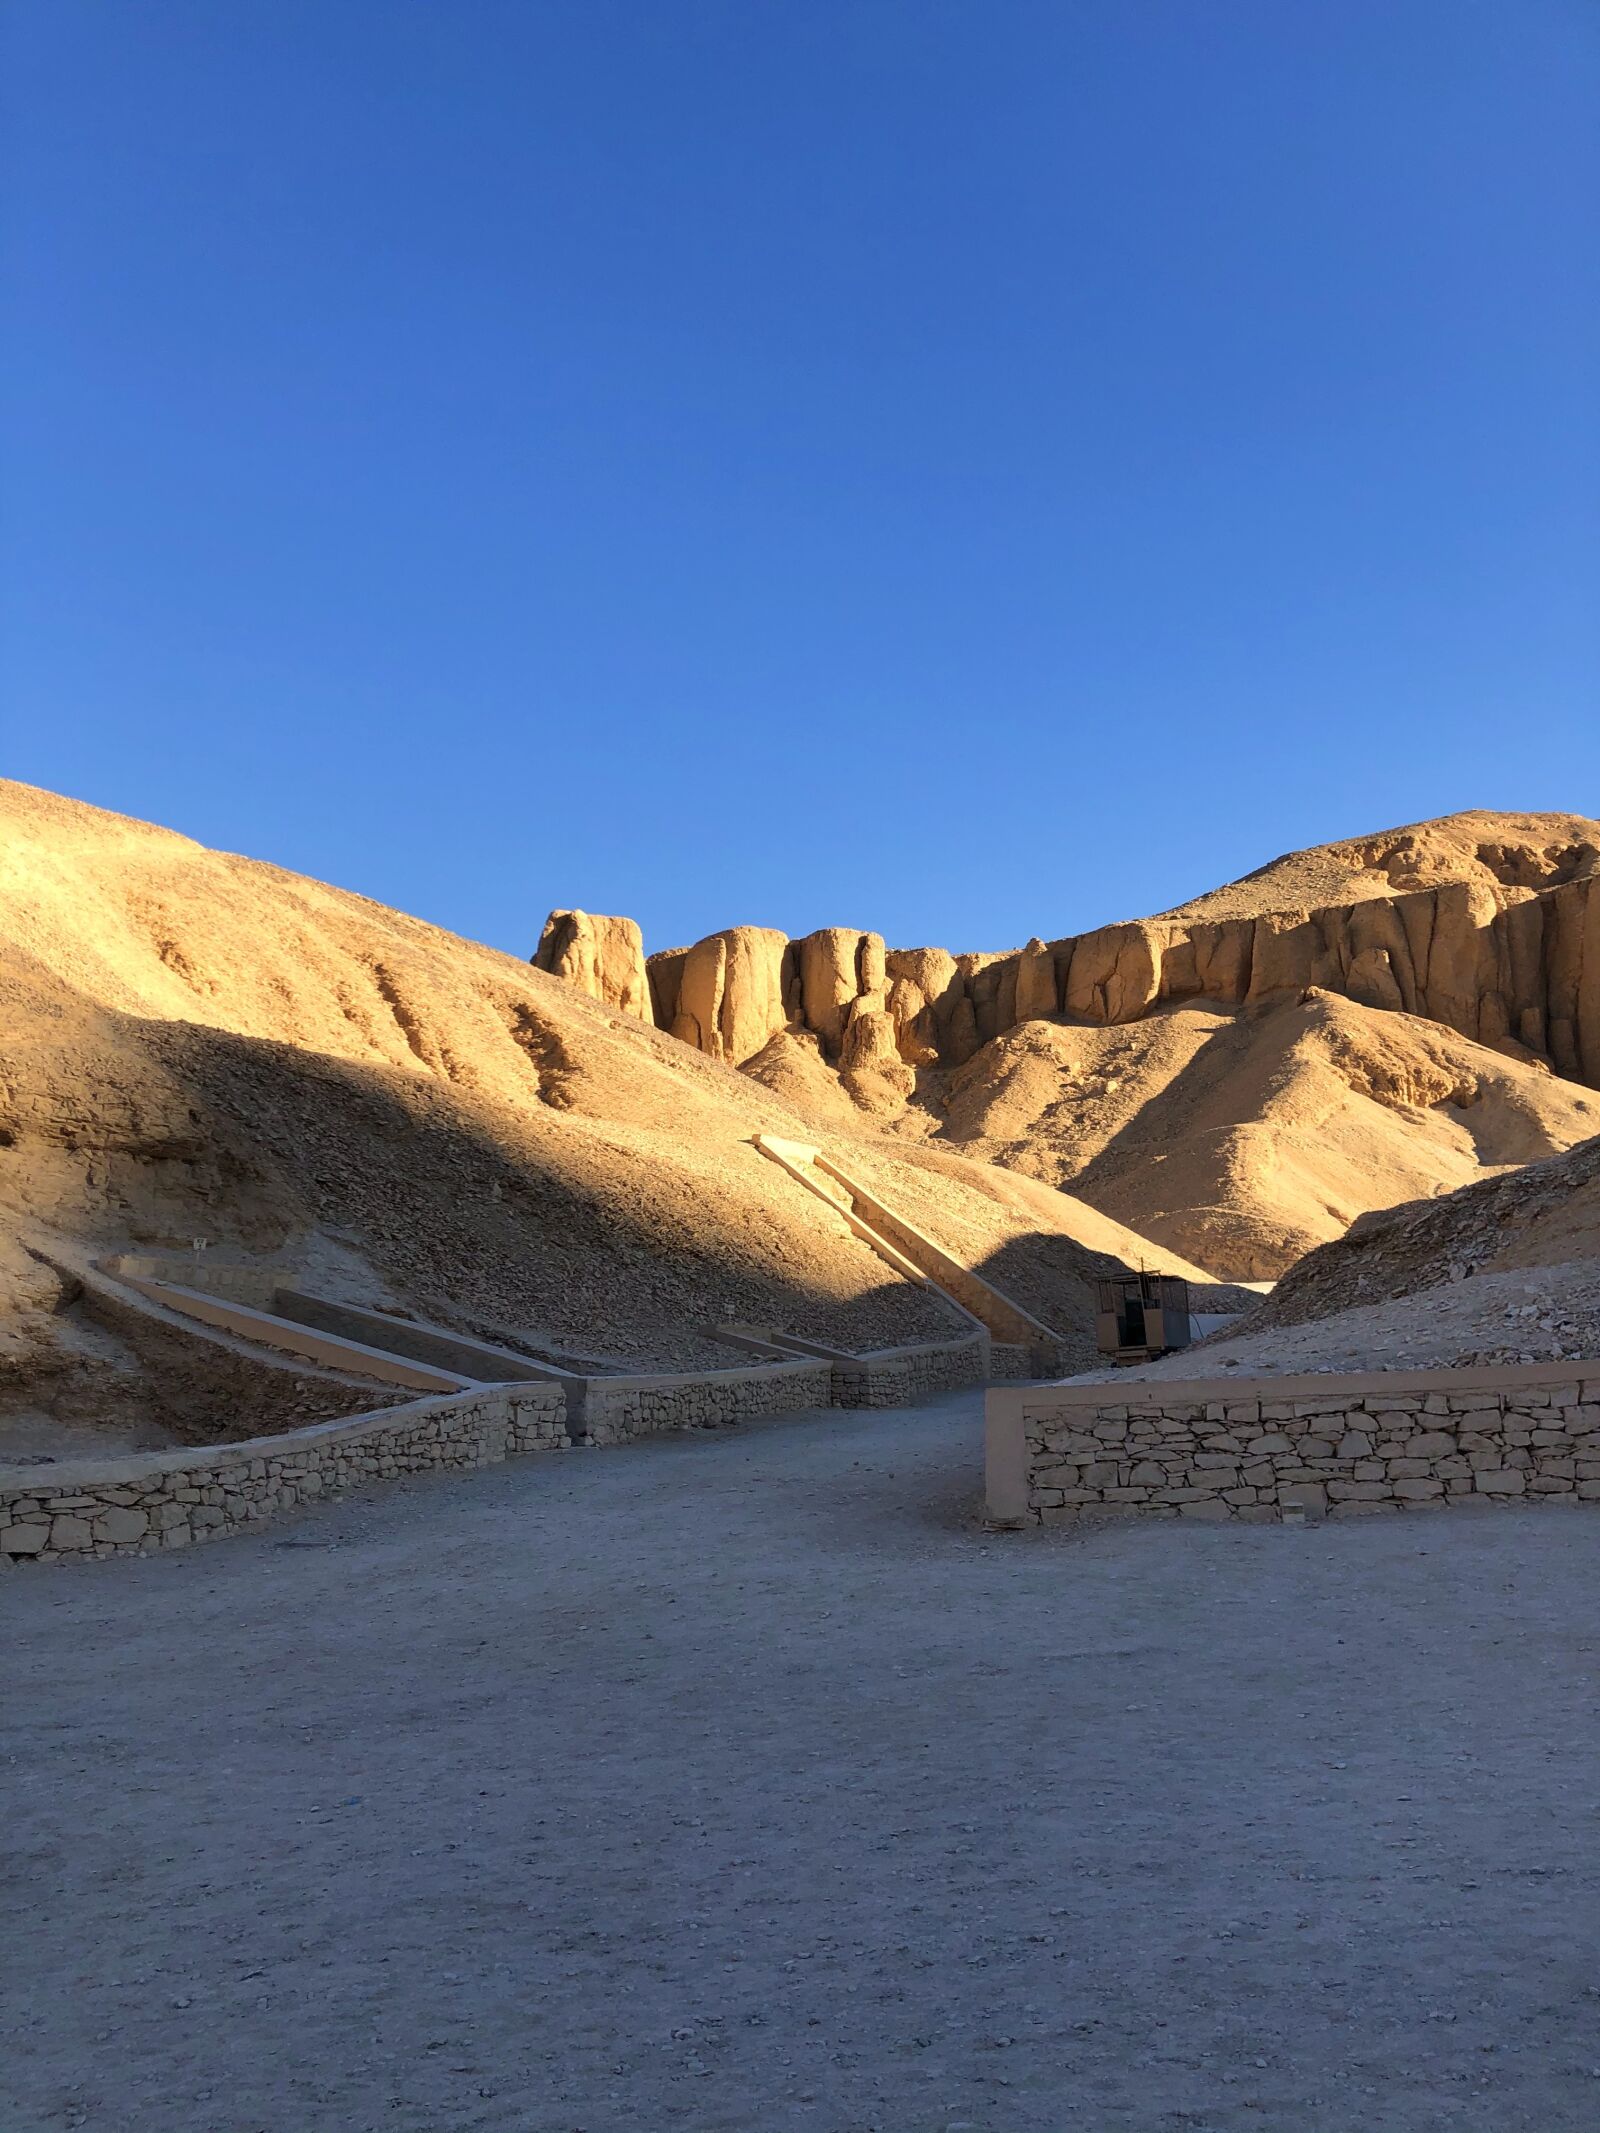 Apple iPhone X + iPhone X back dual camera 4mm f/1.8 sample photo. Valley of kings, luxor photography